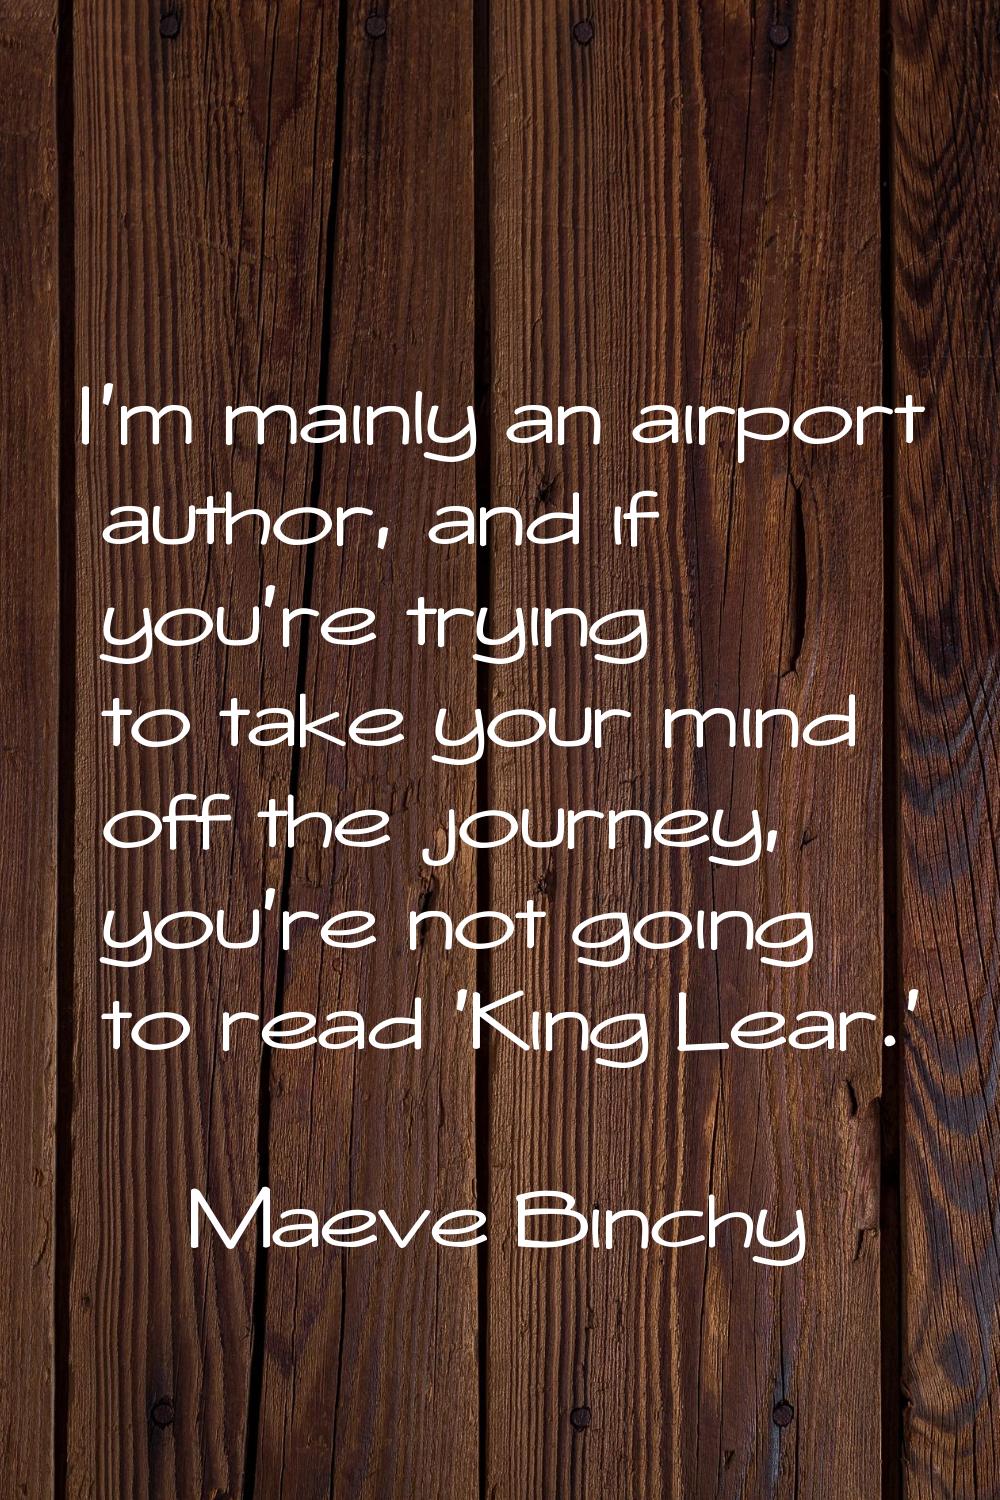 I'm mainly an airport author, and if you're trying to take your mind off the journey, you're not go